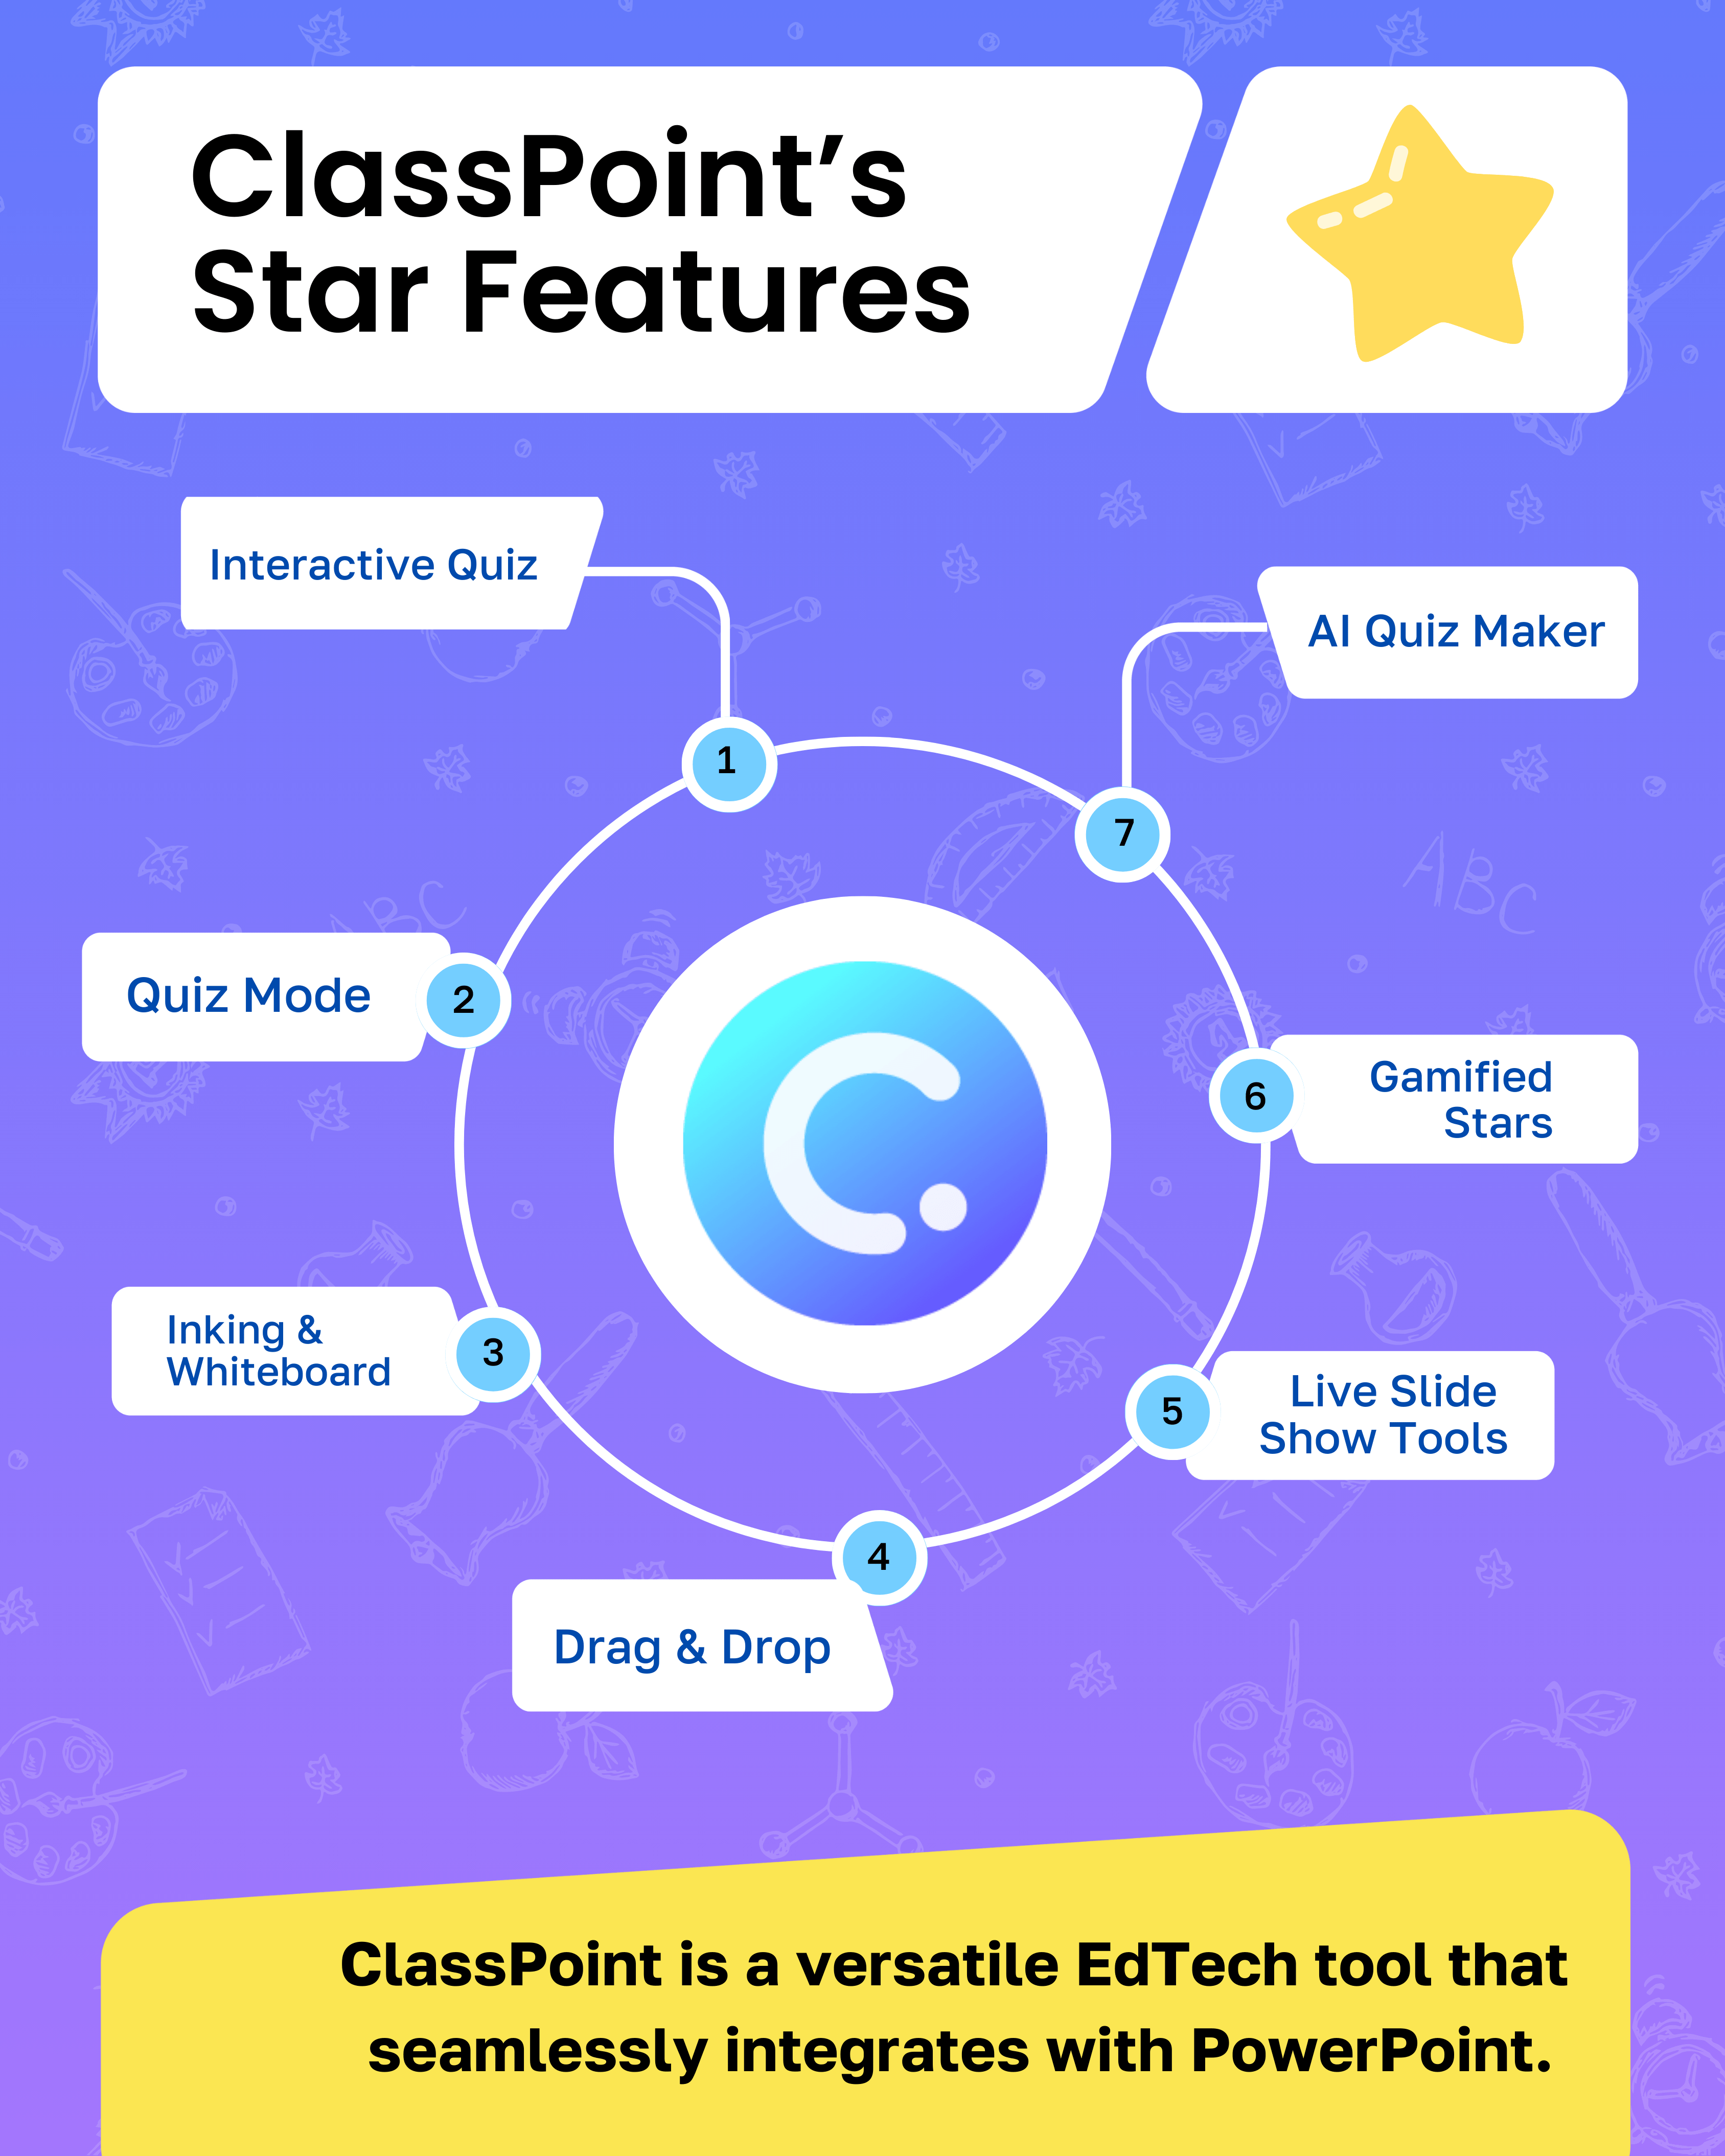 ClassPoint's Star Features